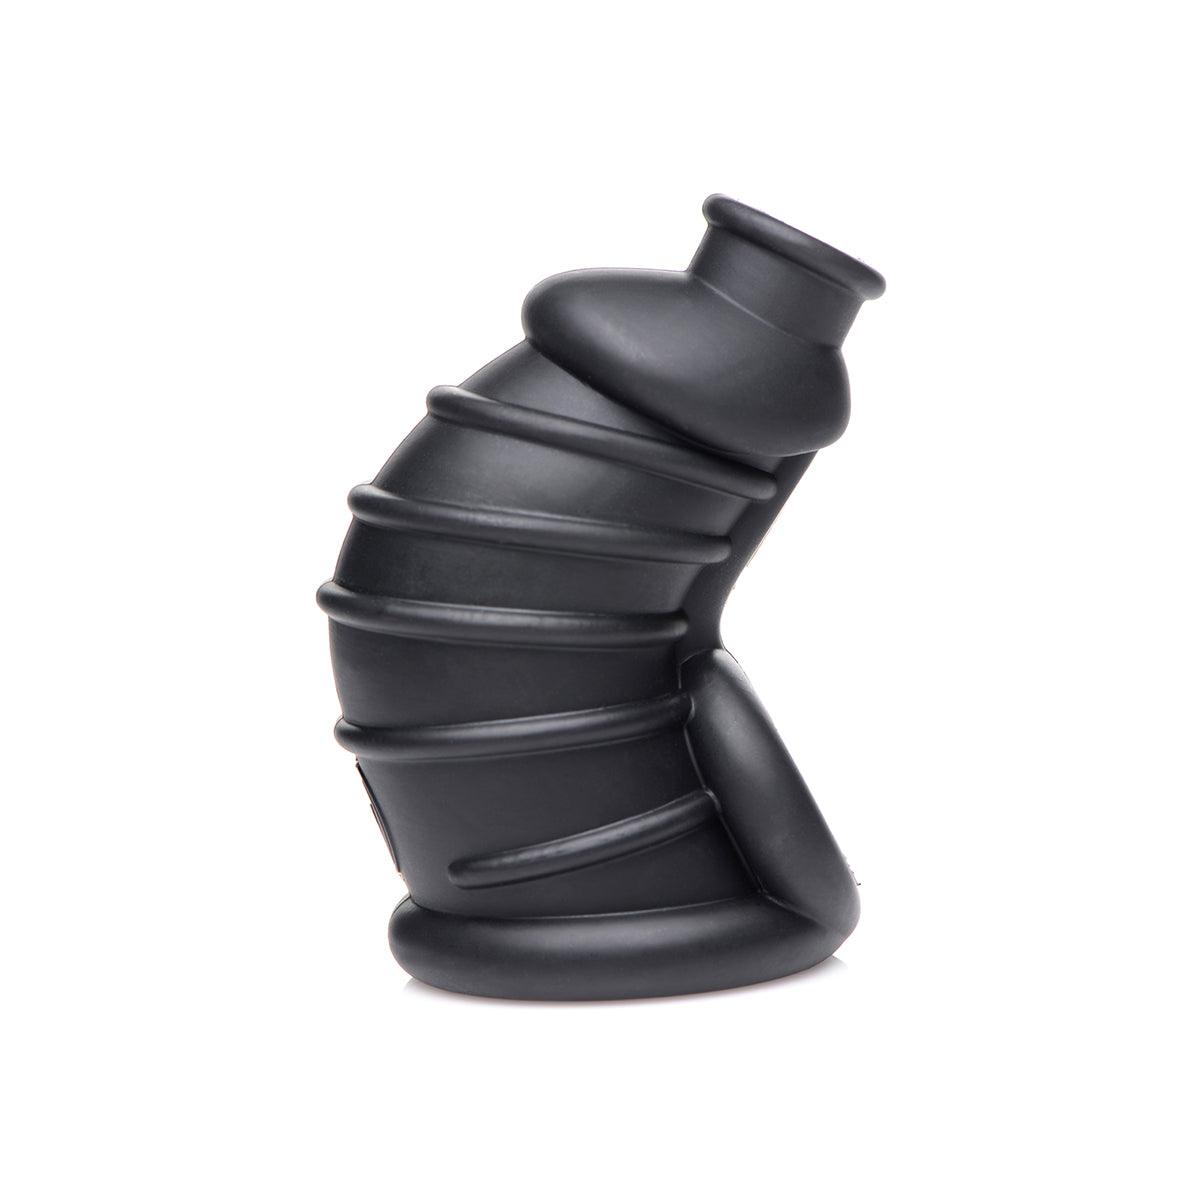 Dark Chamber Silicone Chastity Cage - Black - shop enby